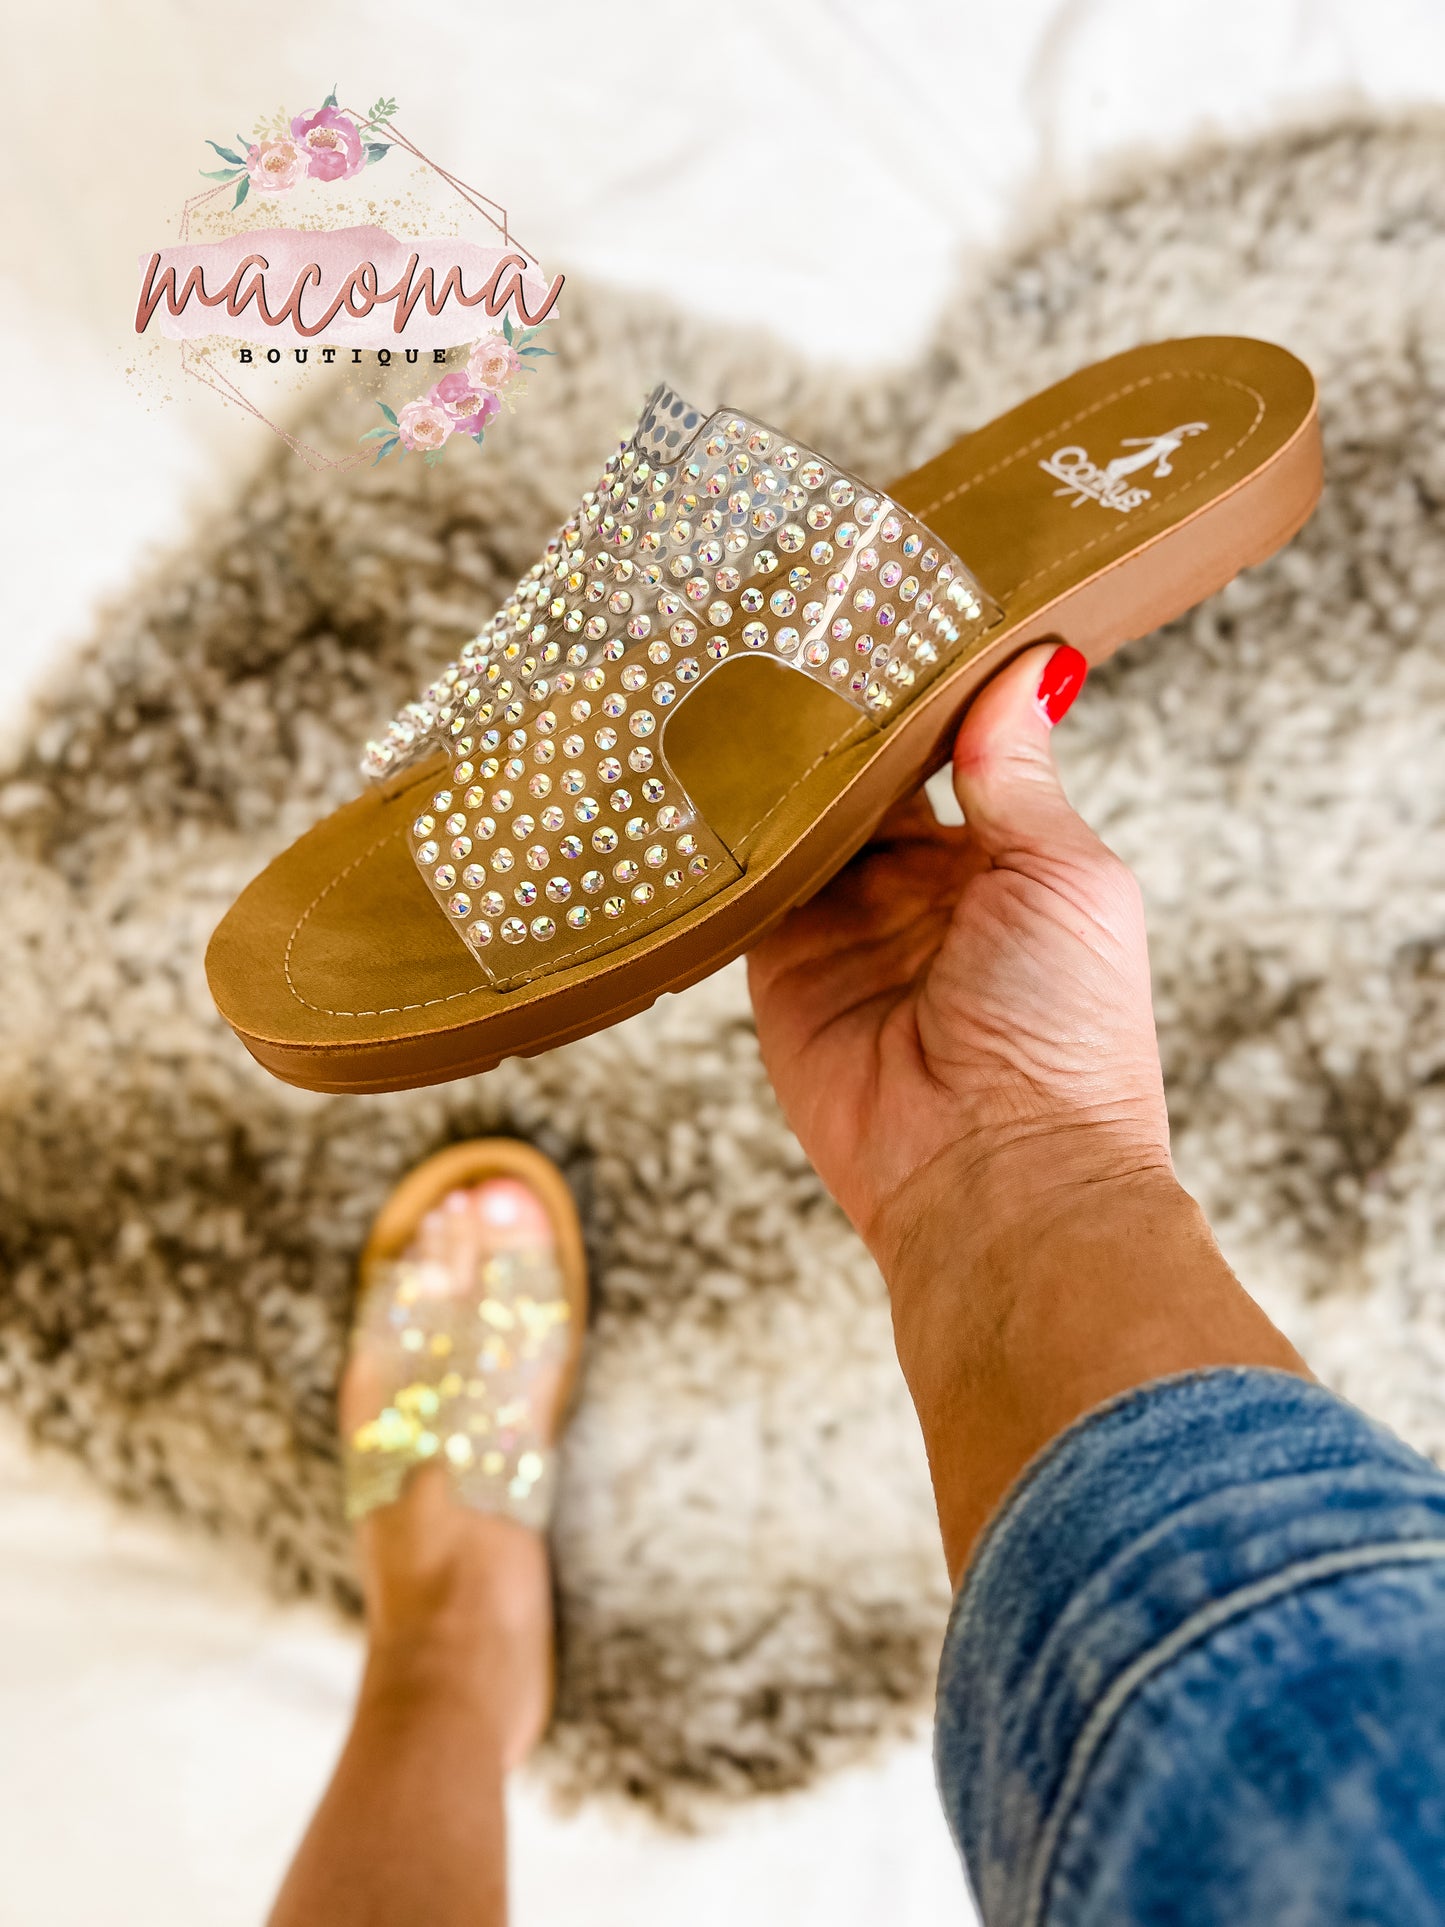 Corky's Clear Bogalusa Sandals